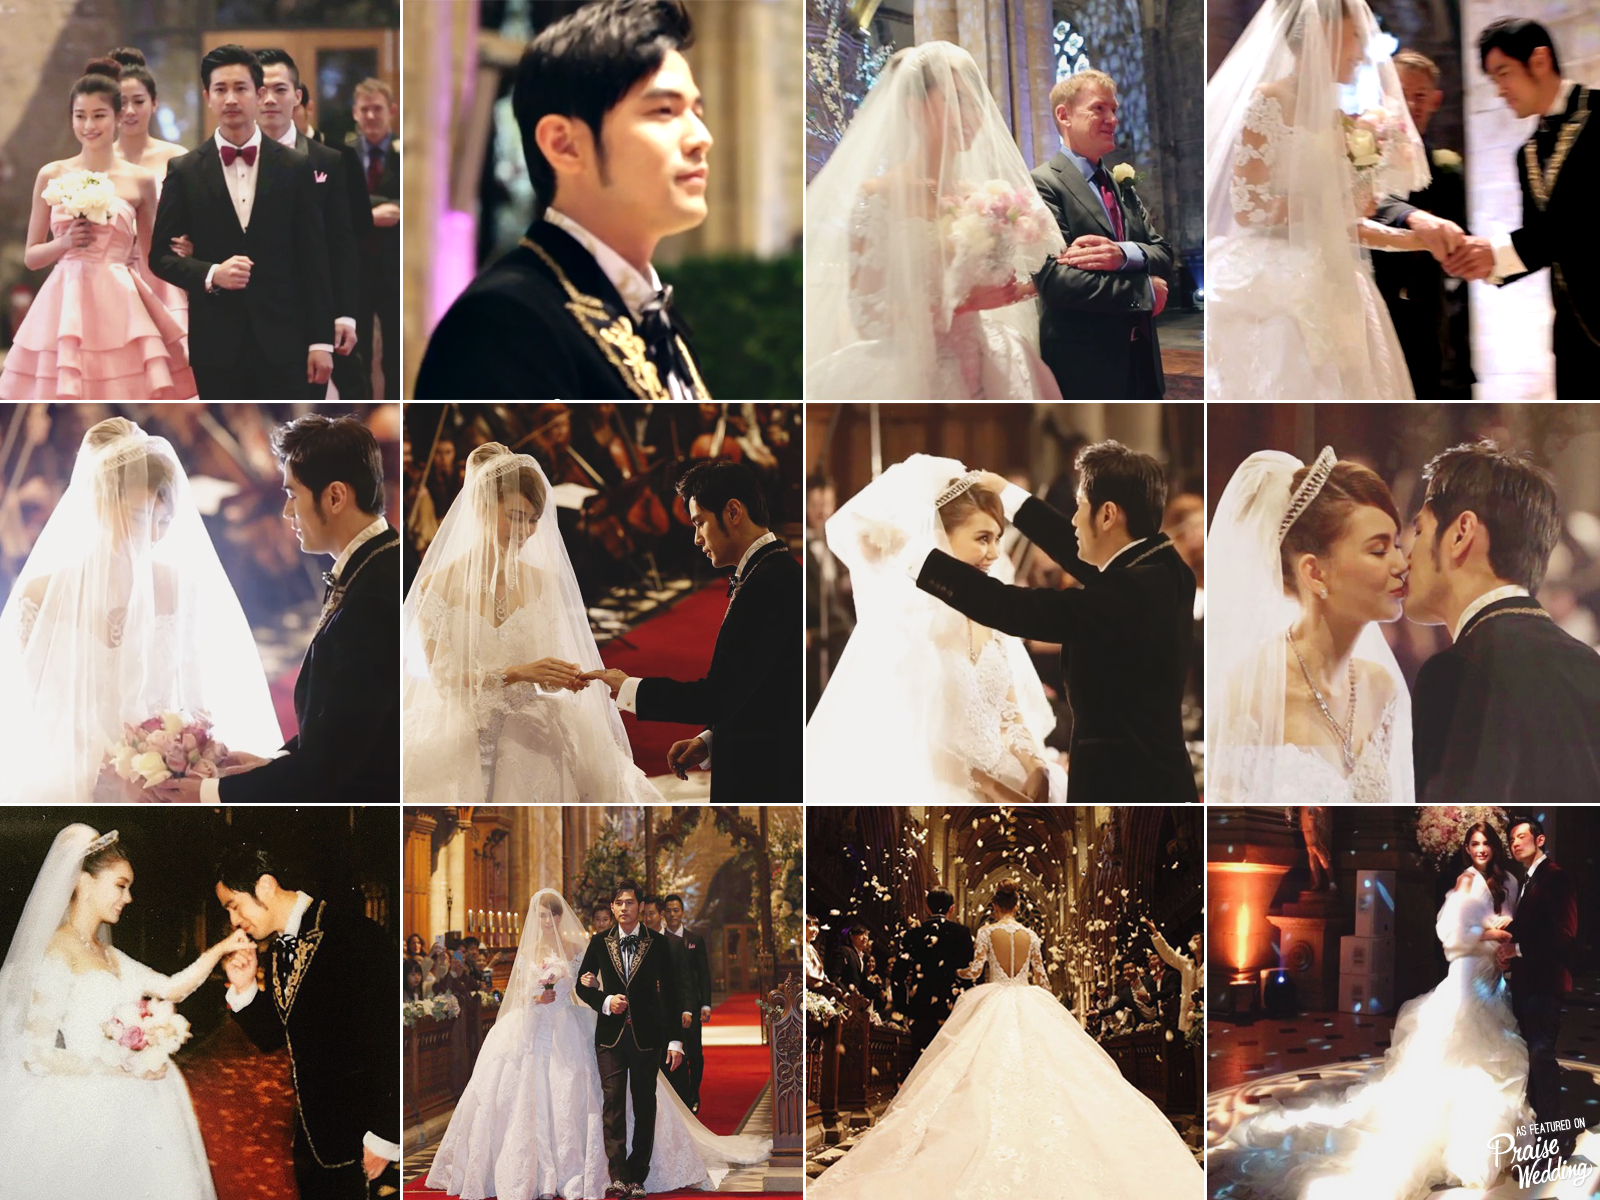 Asian superstar Jay Chou marries Hannah Quinlivan in a fairytale-themed wedding in Selby Abbey!